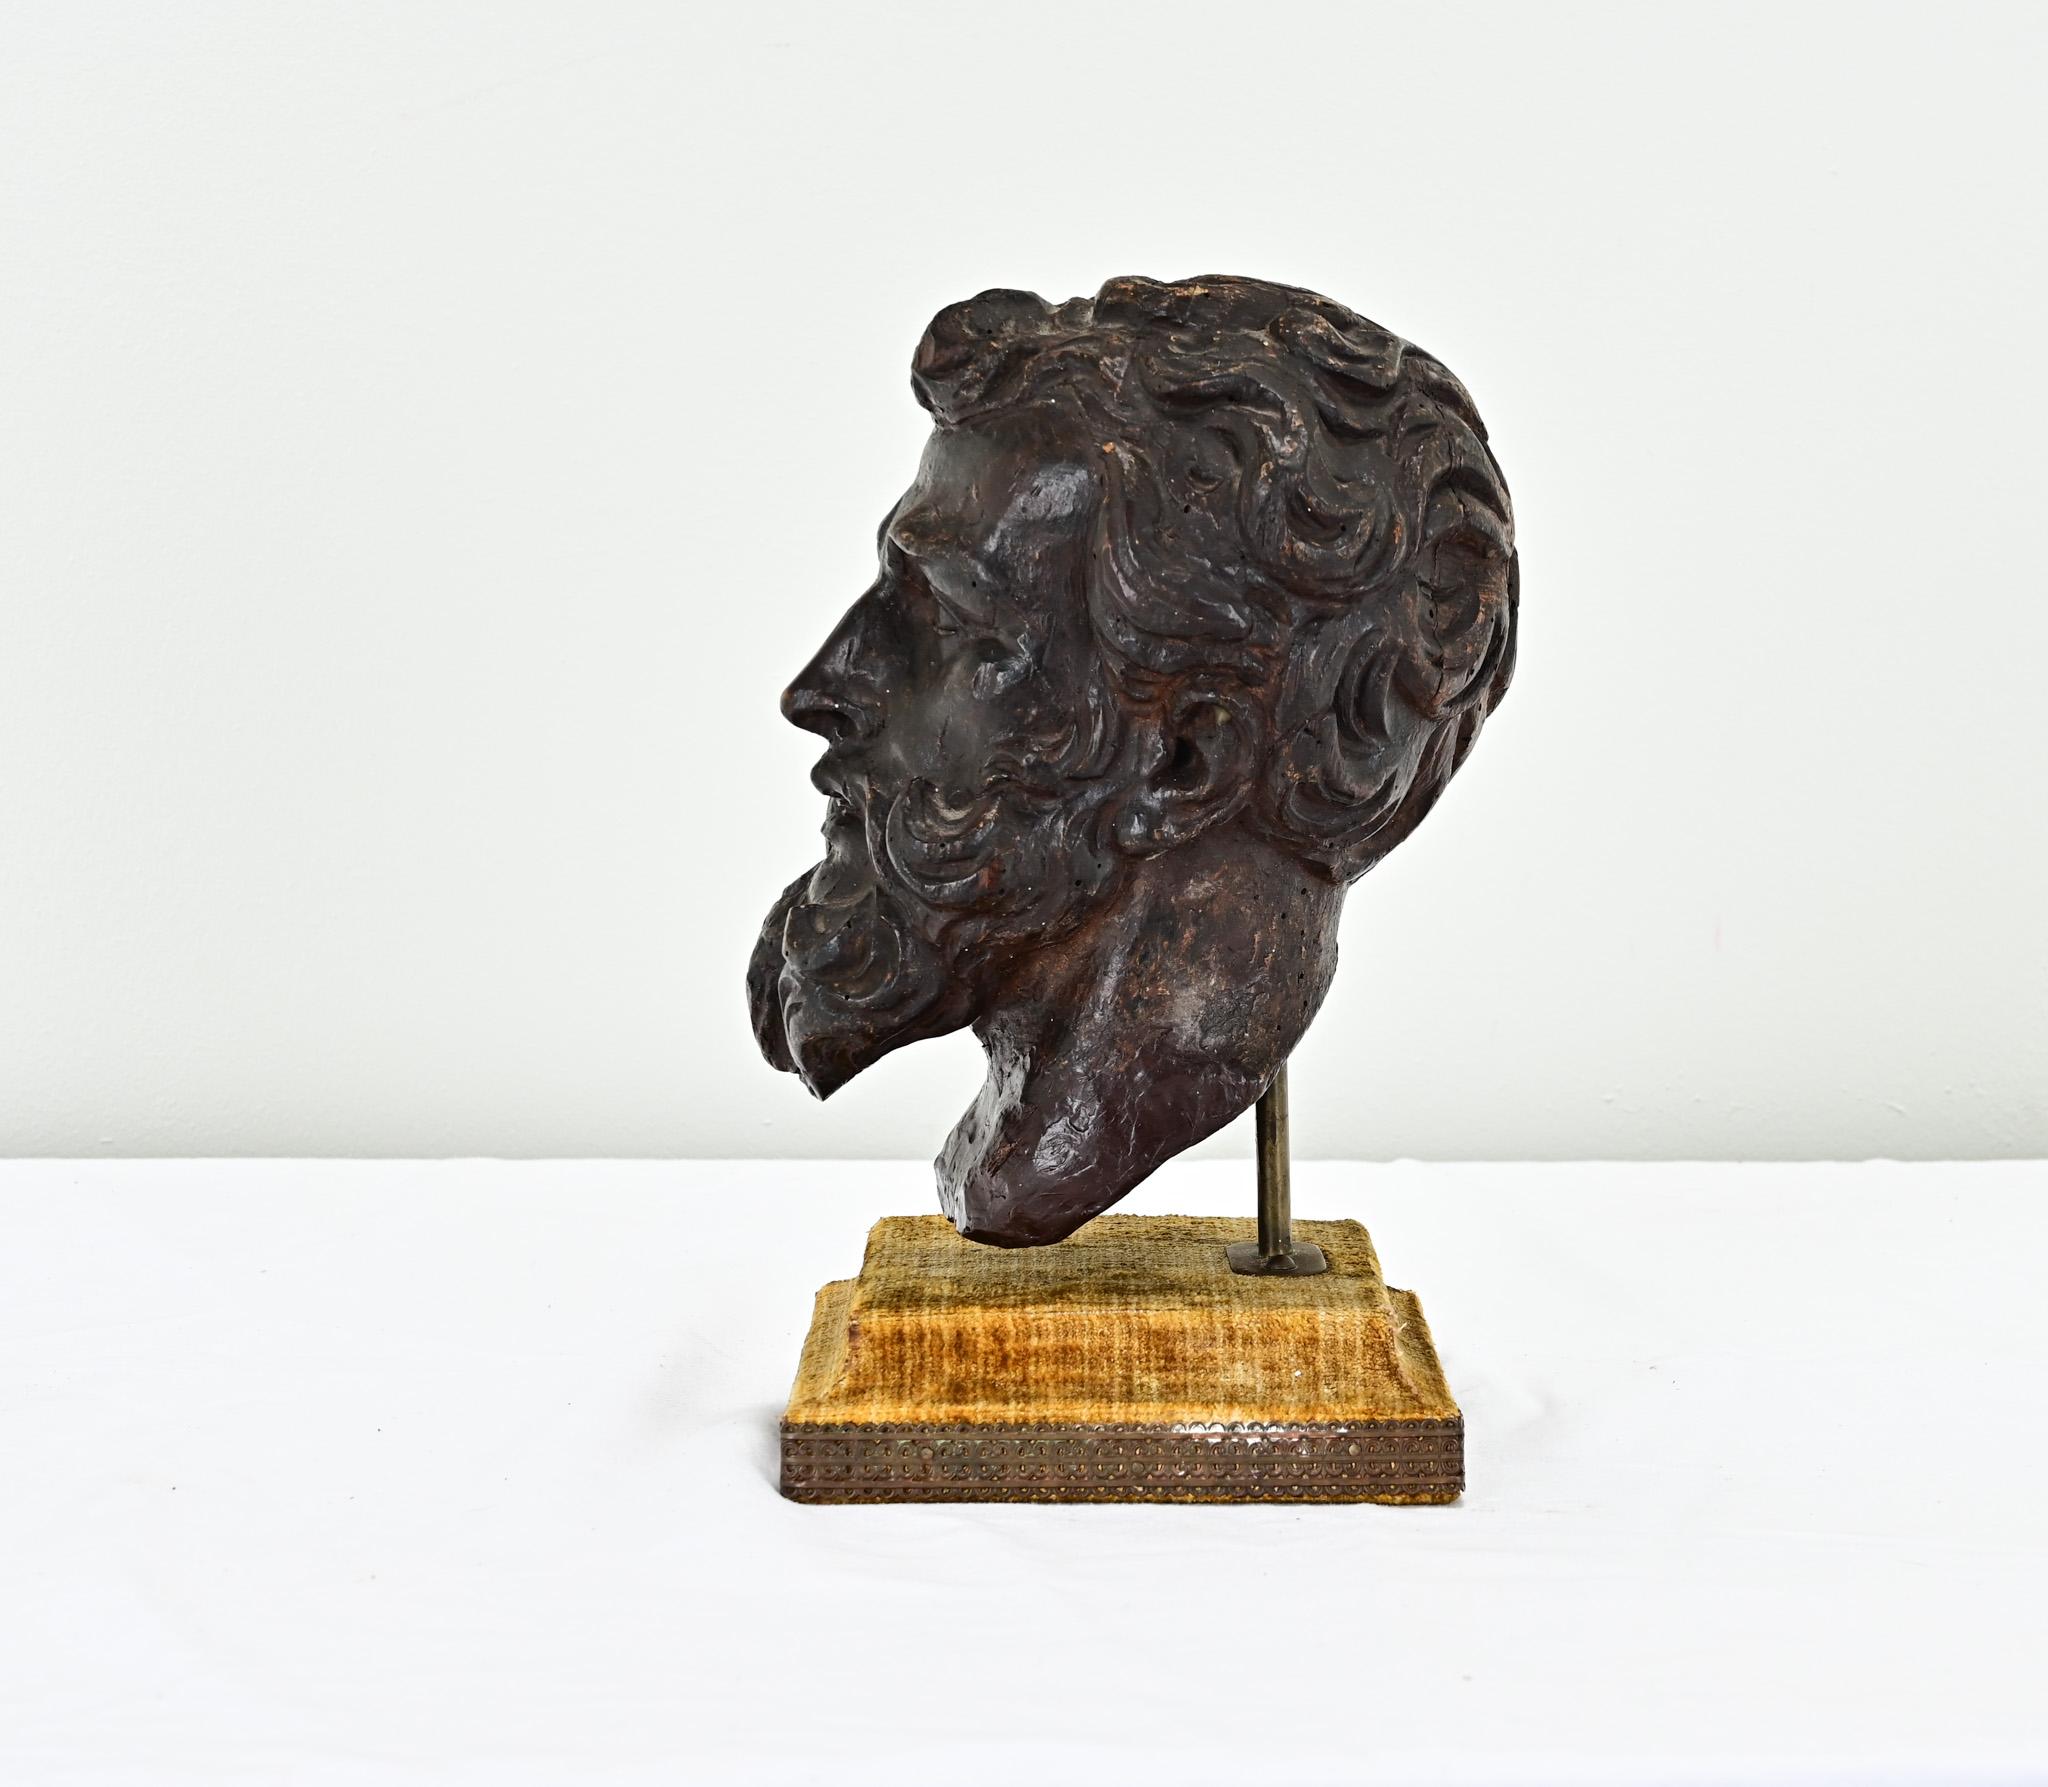 A petite hand-carved bust from a single piece of wood. This would have been a small part of a much larger carving, most likely found in a church. The carving sits over an upholstered velvet stand with brass trim. Cleaned and polished this statue is